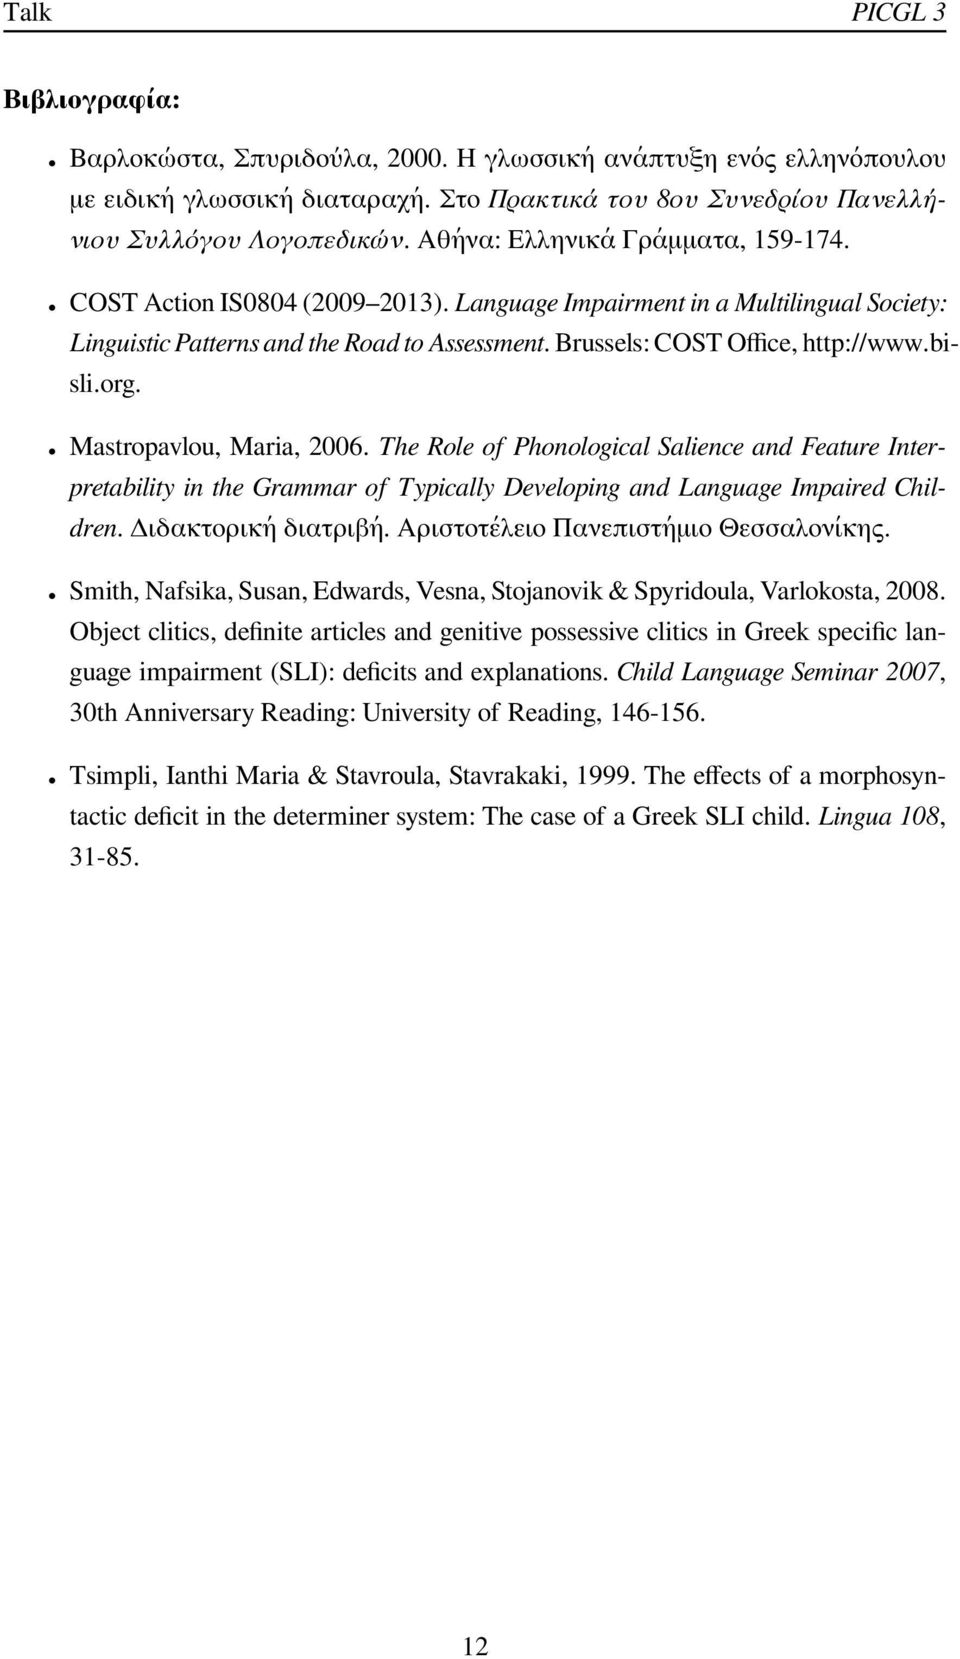 bisli.org. Mastropavlou, Maria, 2006. The Role of Phonological Salience and Feature Interpretability in the Grammar of Typically Developing and Language Impaired Children. Διδακτορική διατριβή.